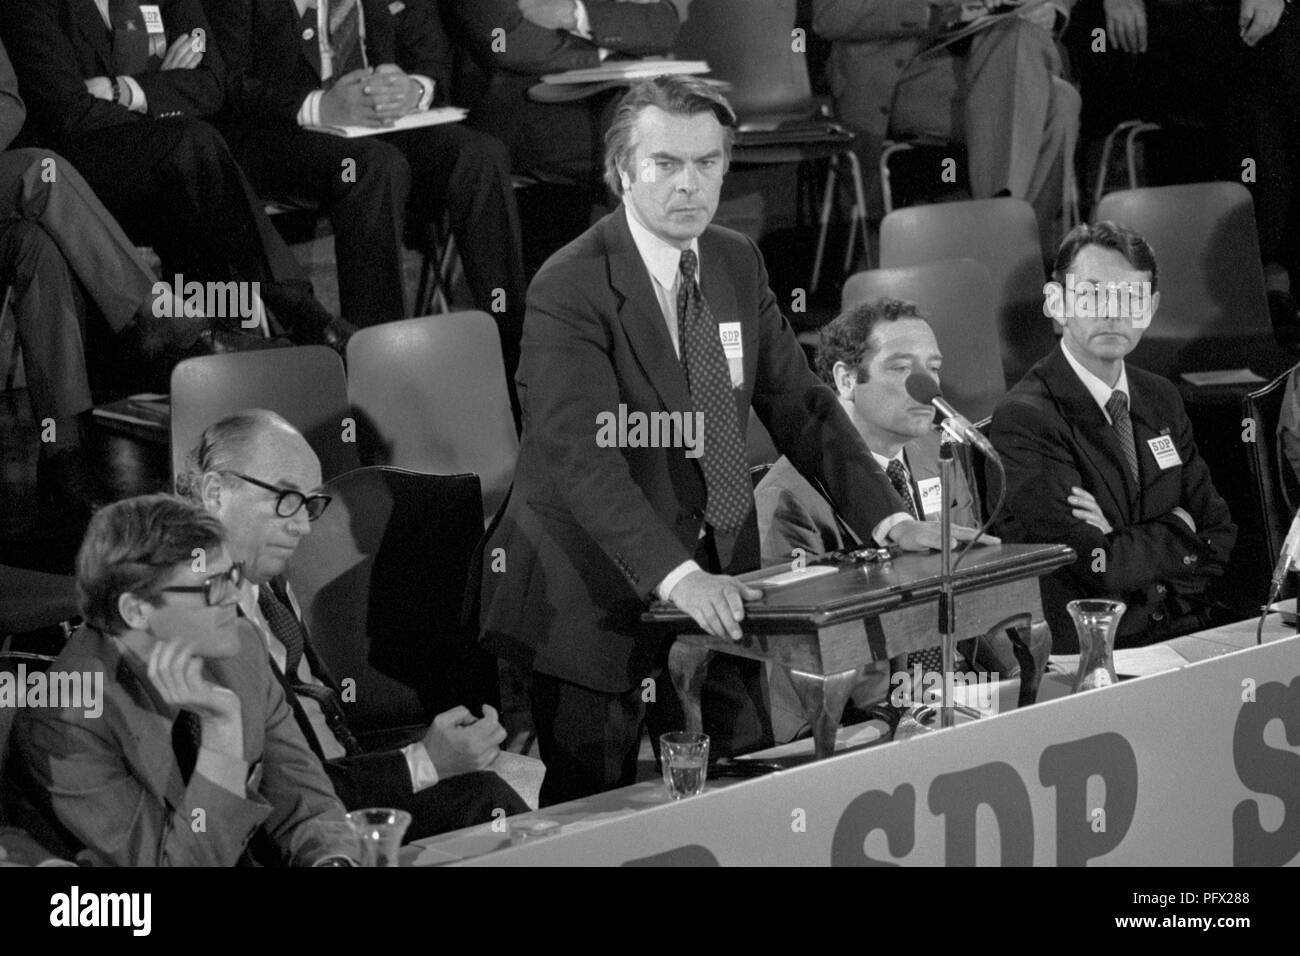 Dr David Owen pauses during a speech on constitutional reform on the rostrum at central Hall, Westminster, on the 5th day of the SDP conference. Second left on the platform is co-leader of the new Party, Roy Jenkins. Stock Photo